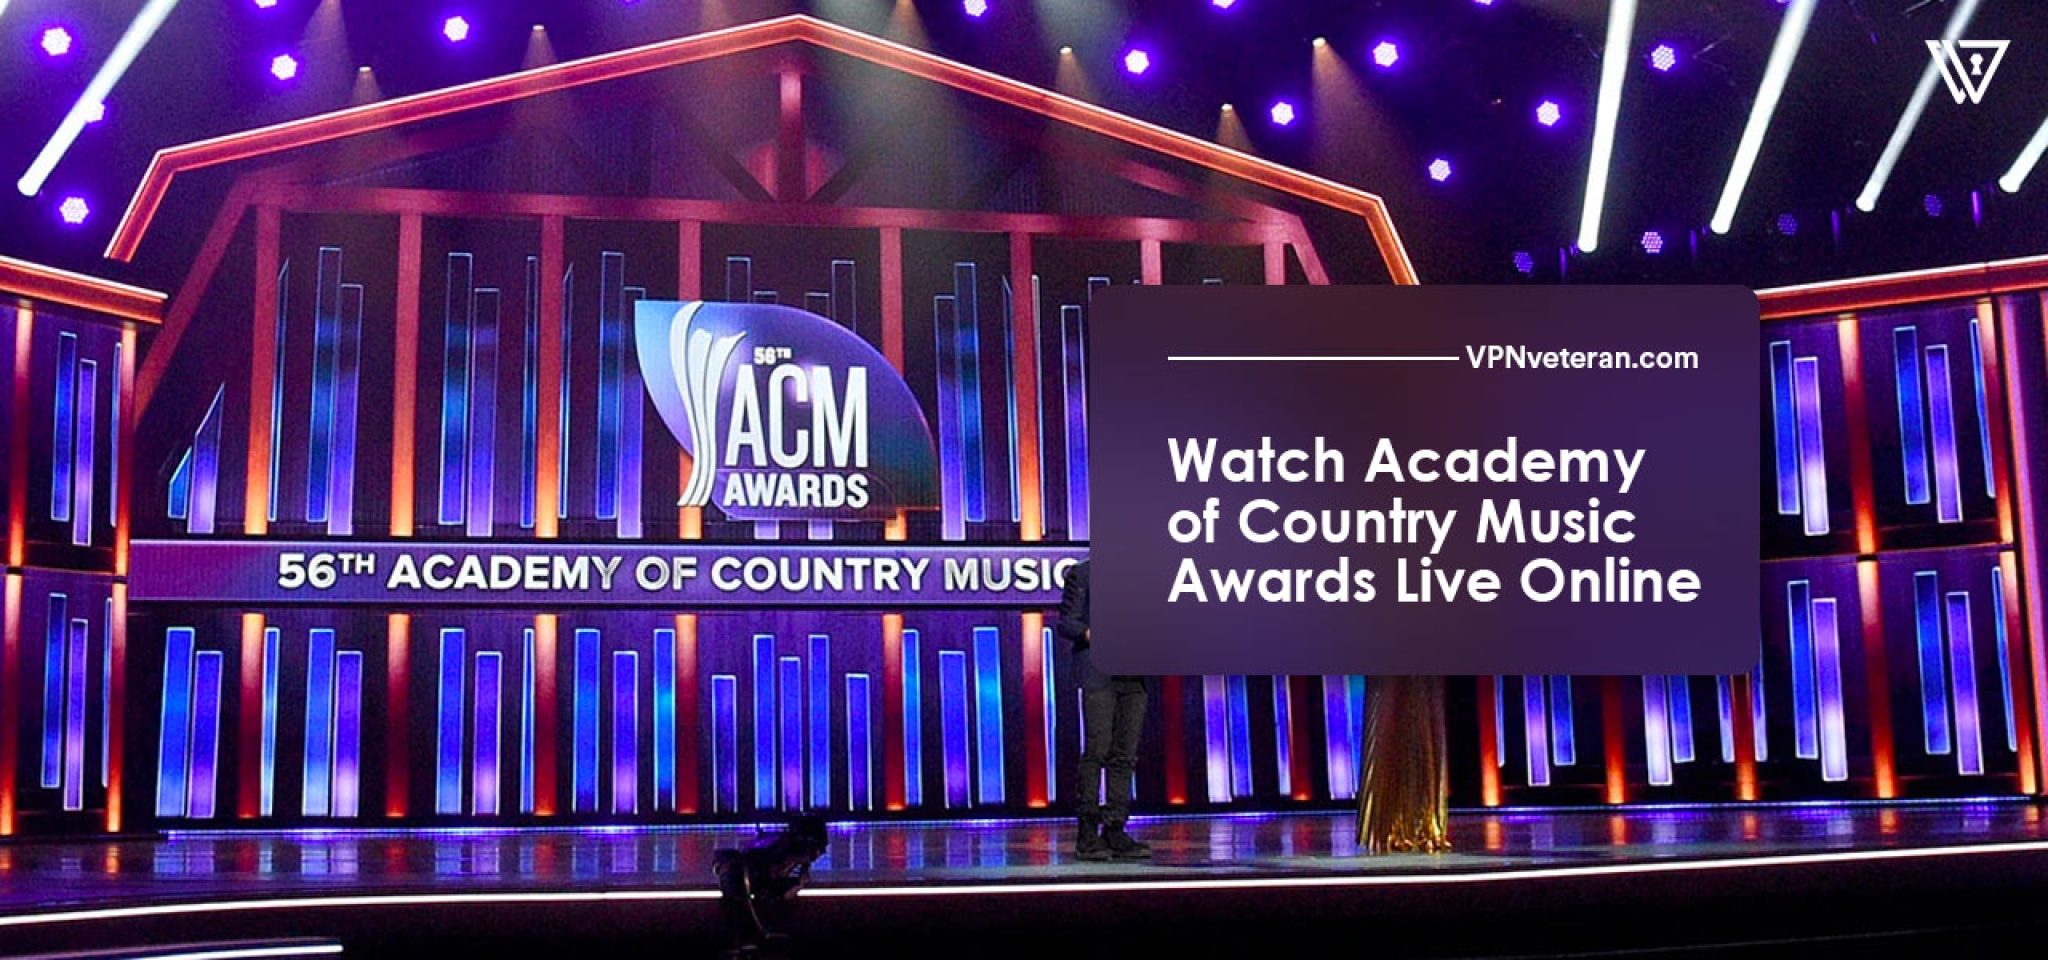 How To Watch Academy of Country Music Awards in 2023